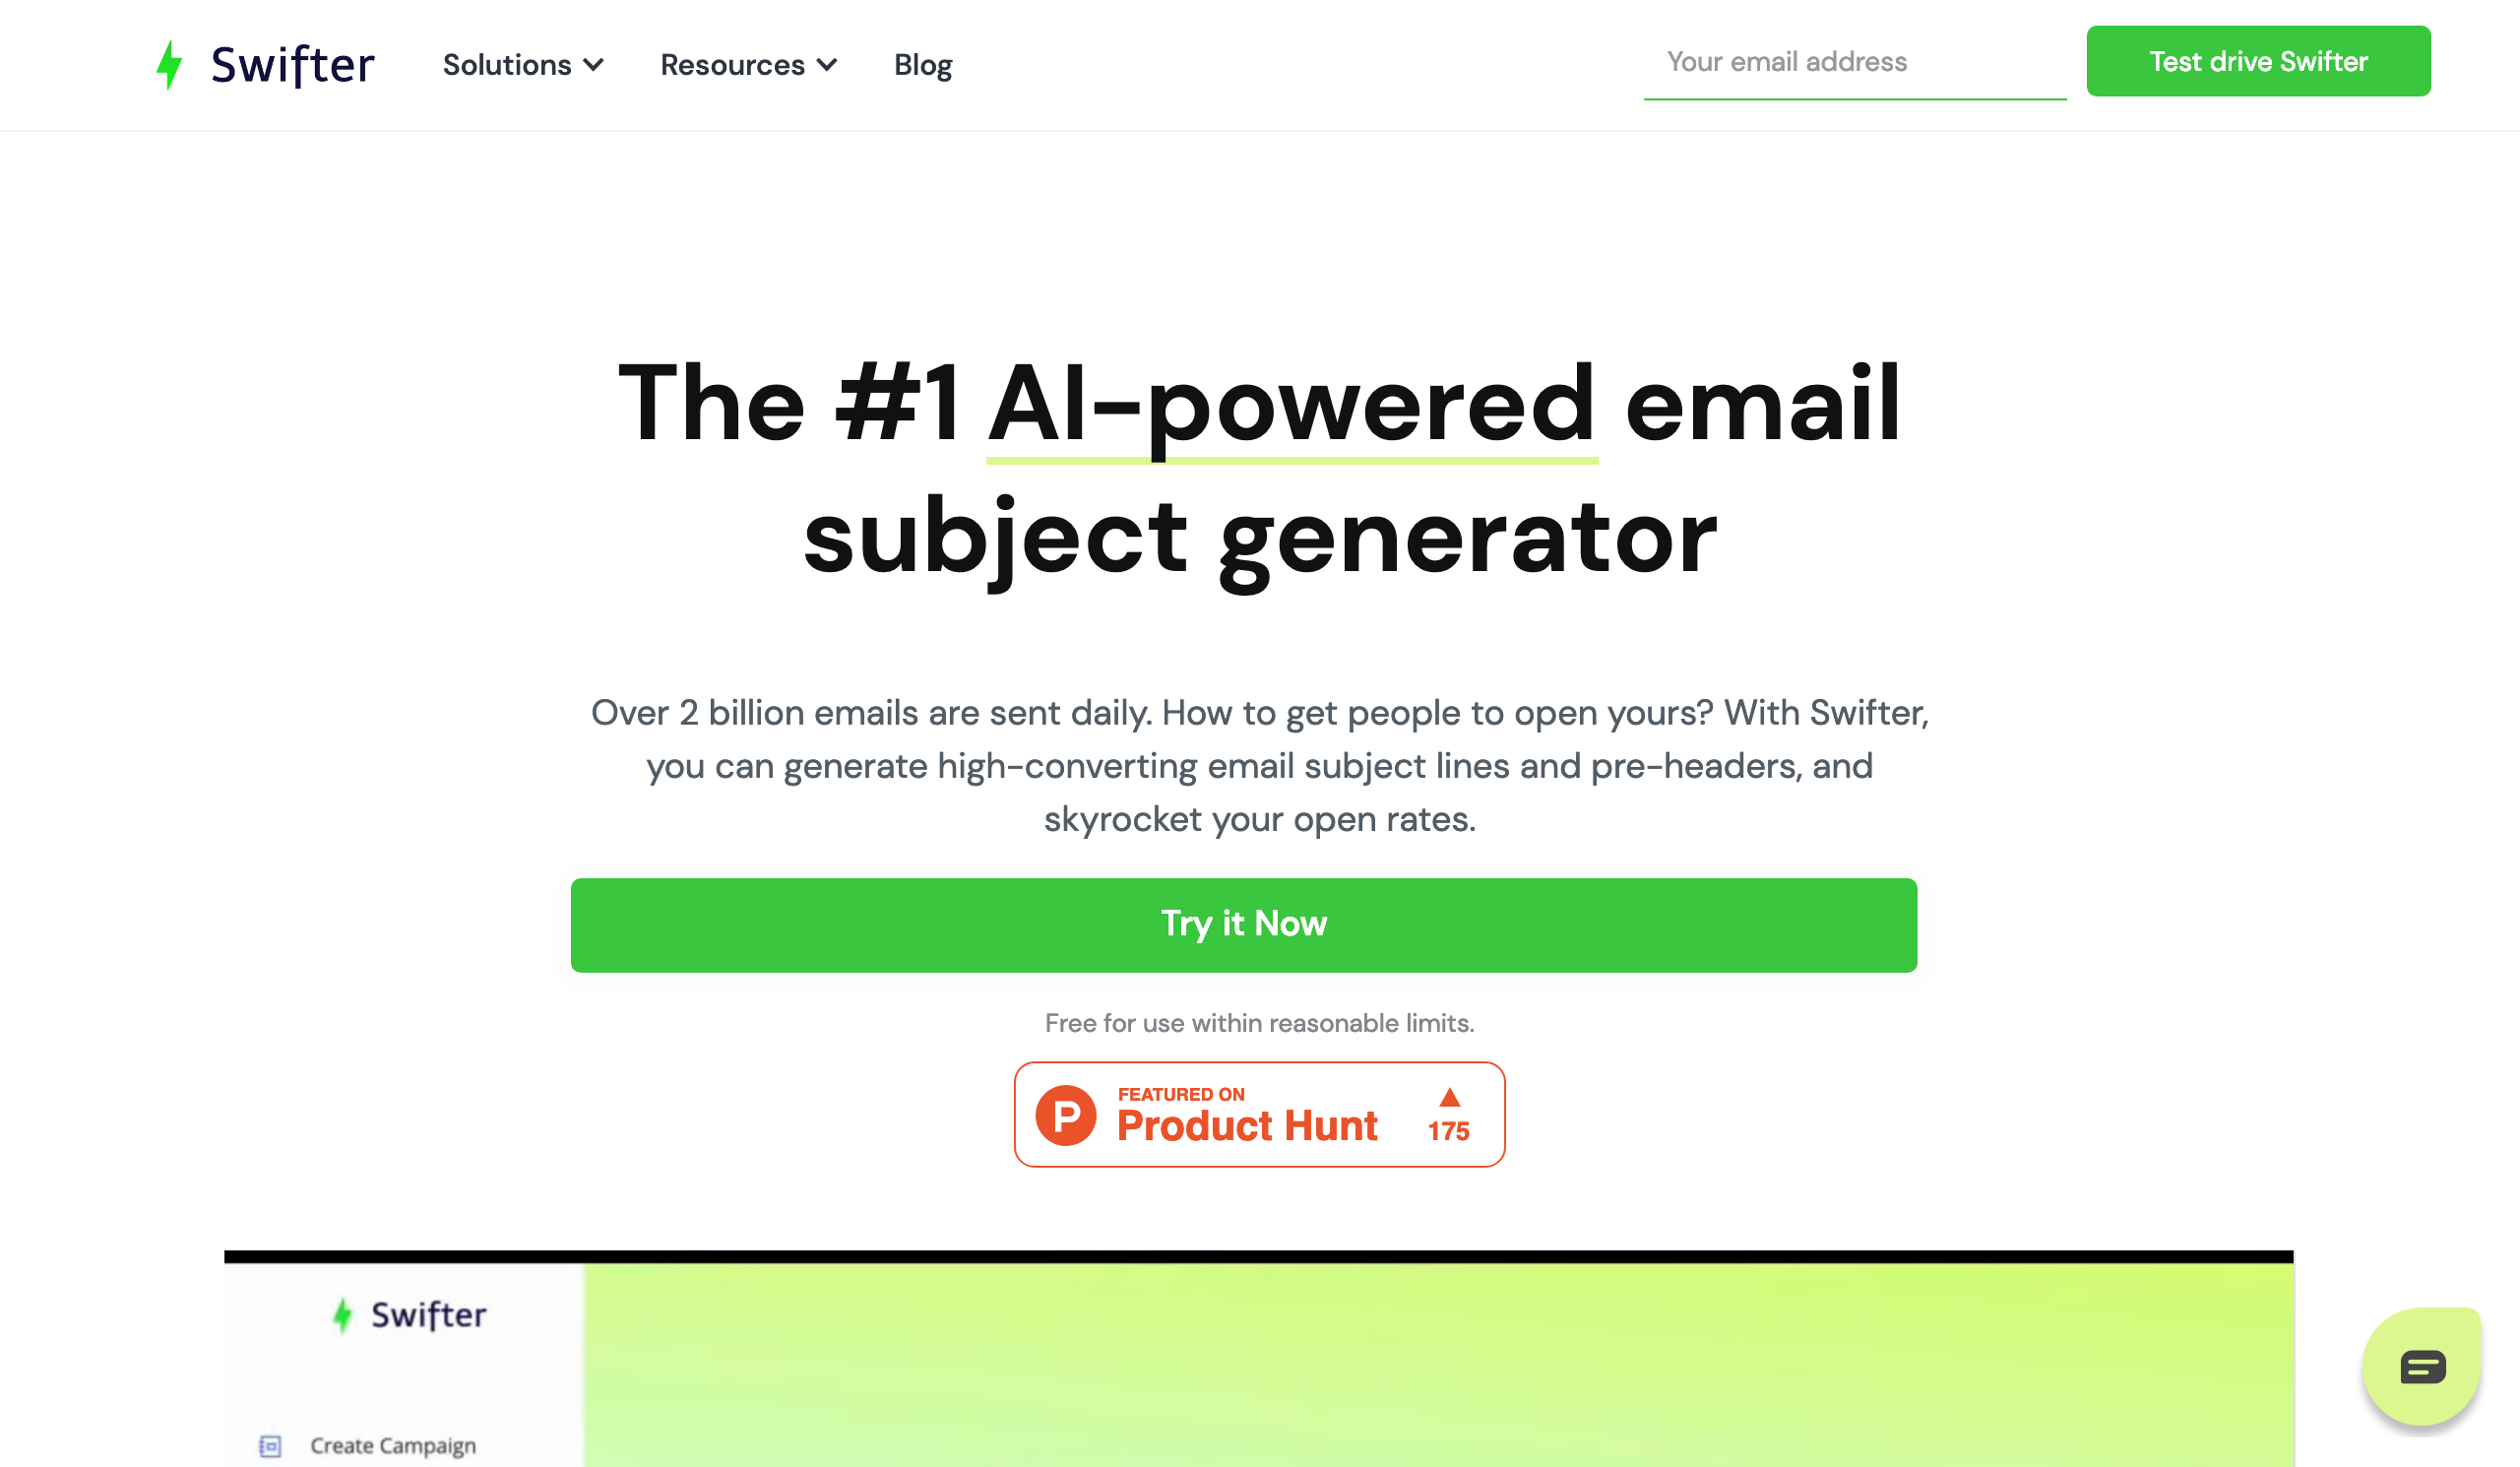 Email Subject Generator by Swifter - скриншот 1